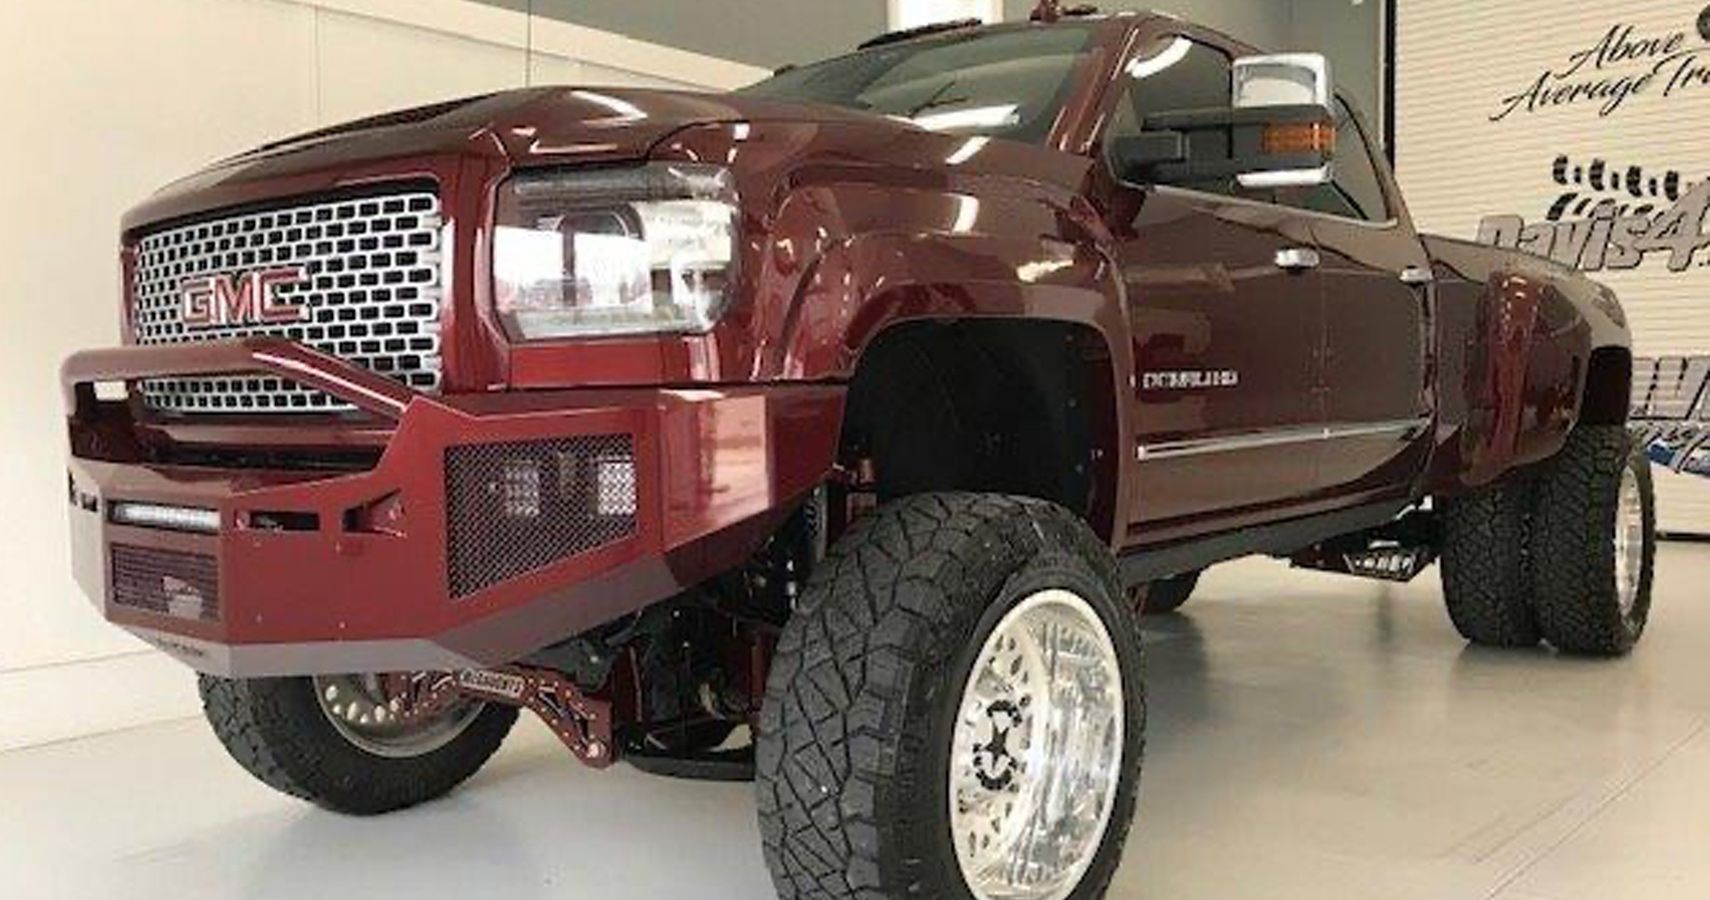 ExSEMA GMC Denali 3500 Is Tricked Out And Ready To Go